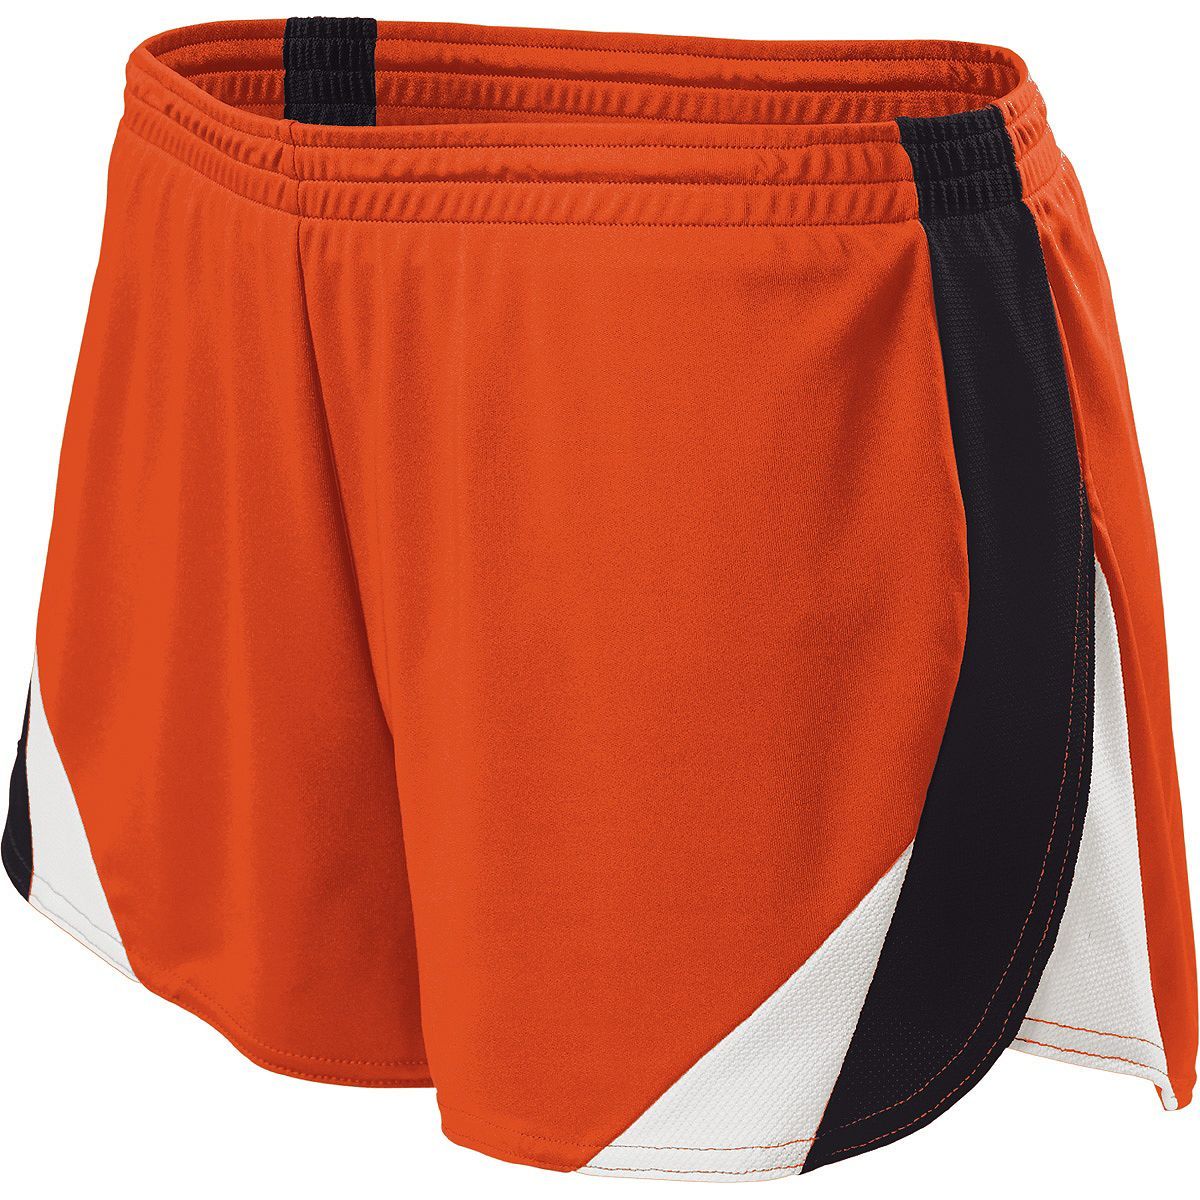 Holloway Ladies Approach Shorts in Orange/Black/White  -Part of the Ladies, Ladies-Shorts, Track-Field, Holloway product lines at KanaleyCreations.com